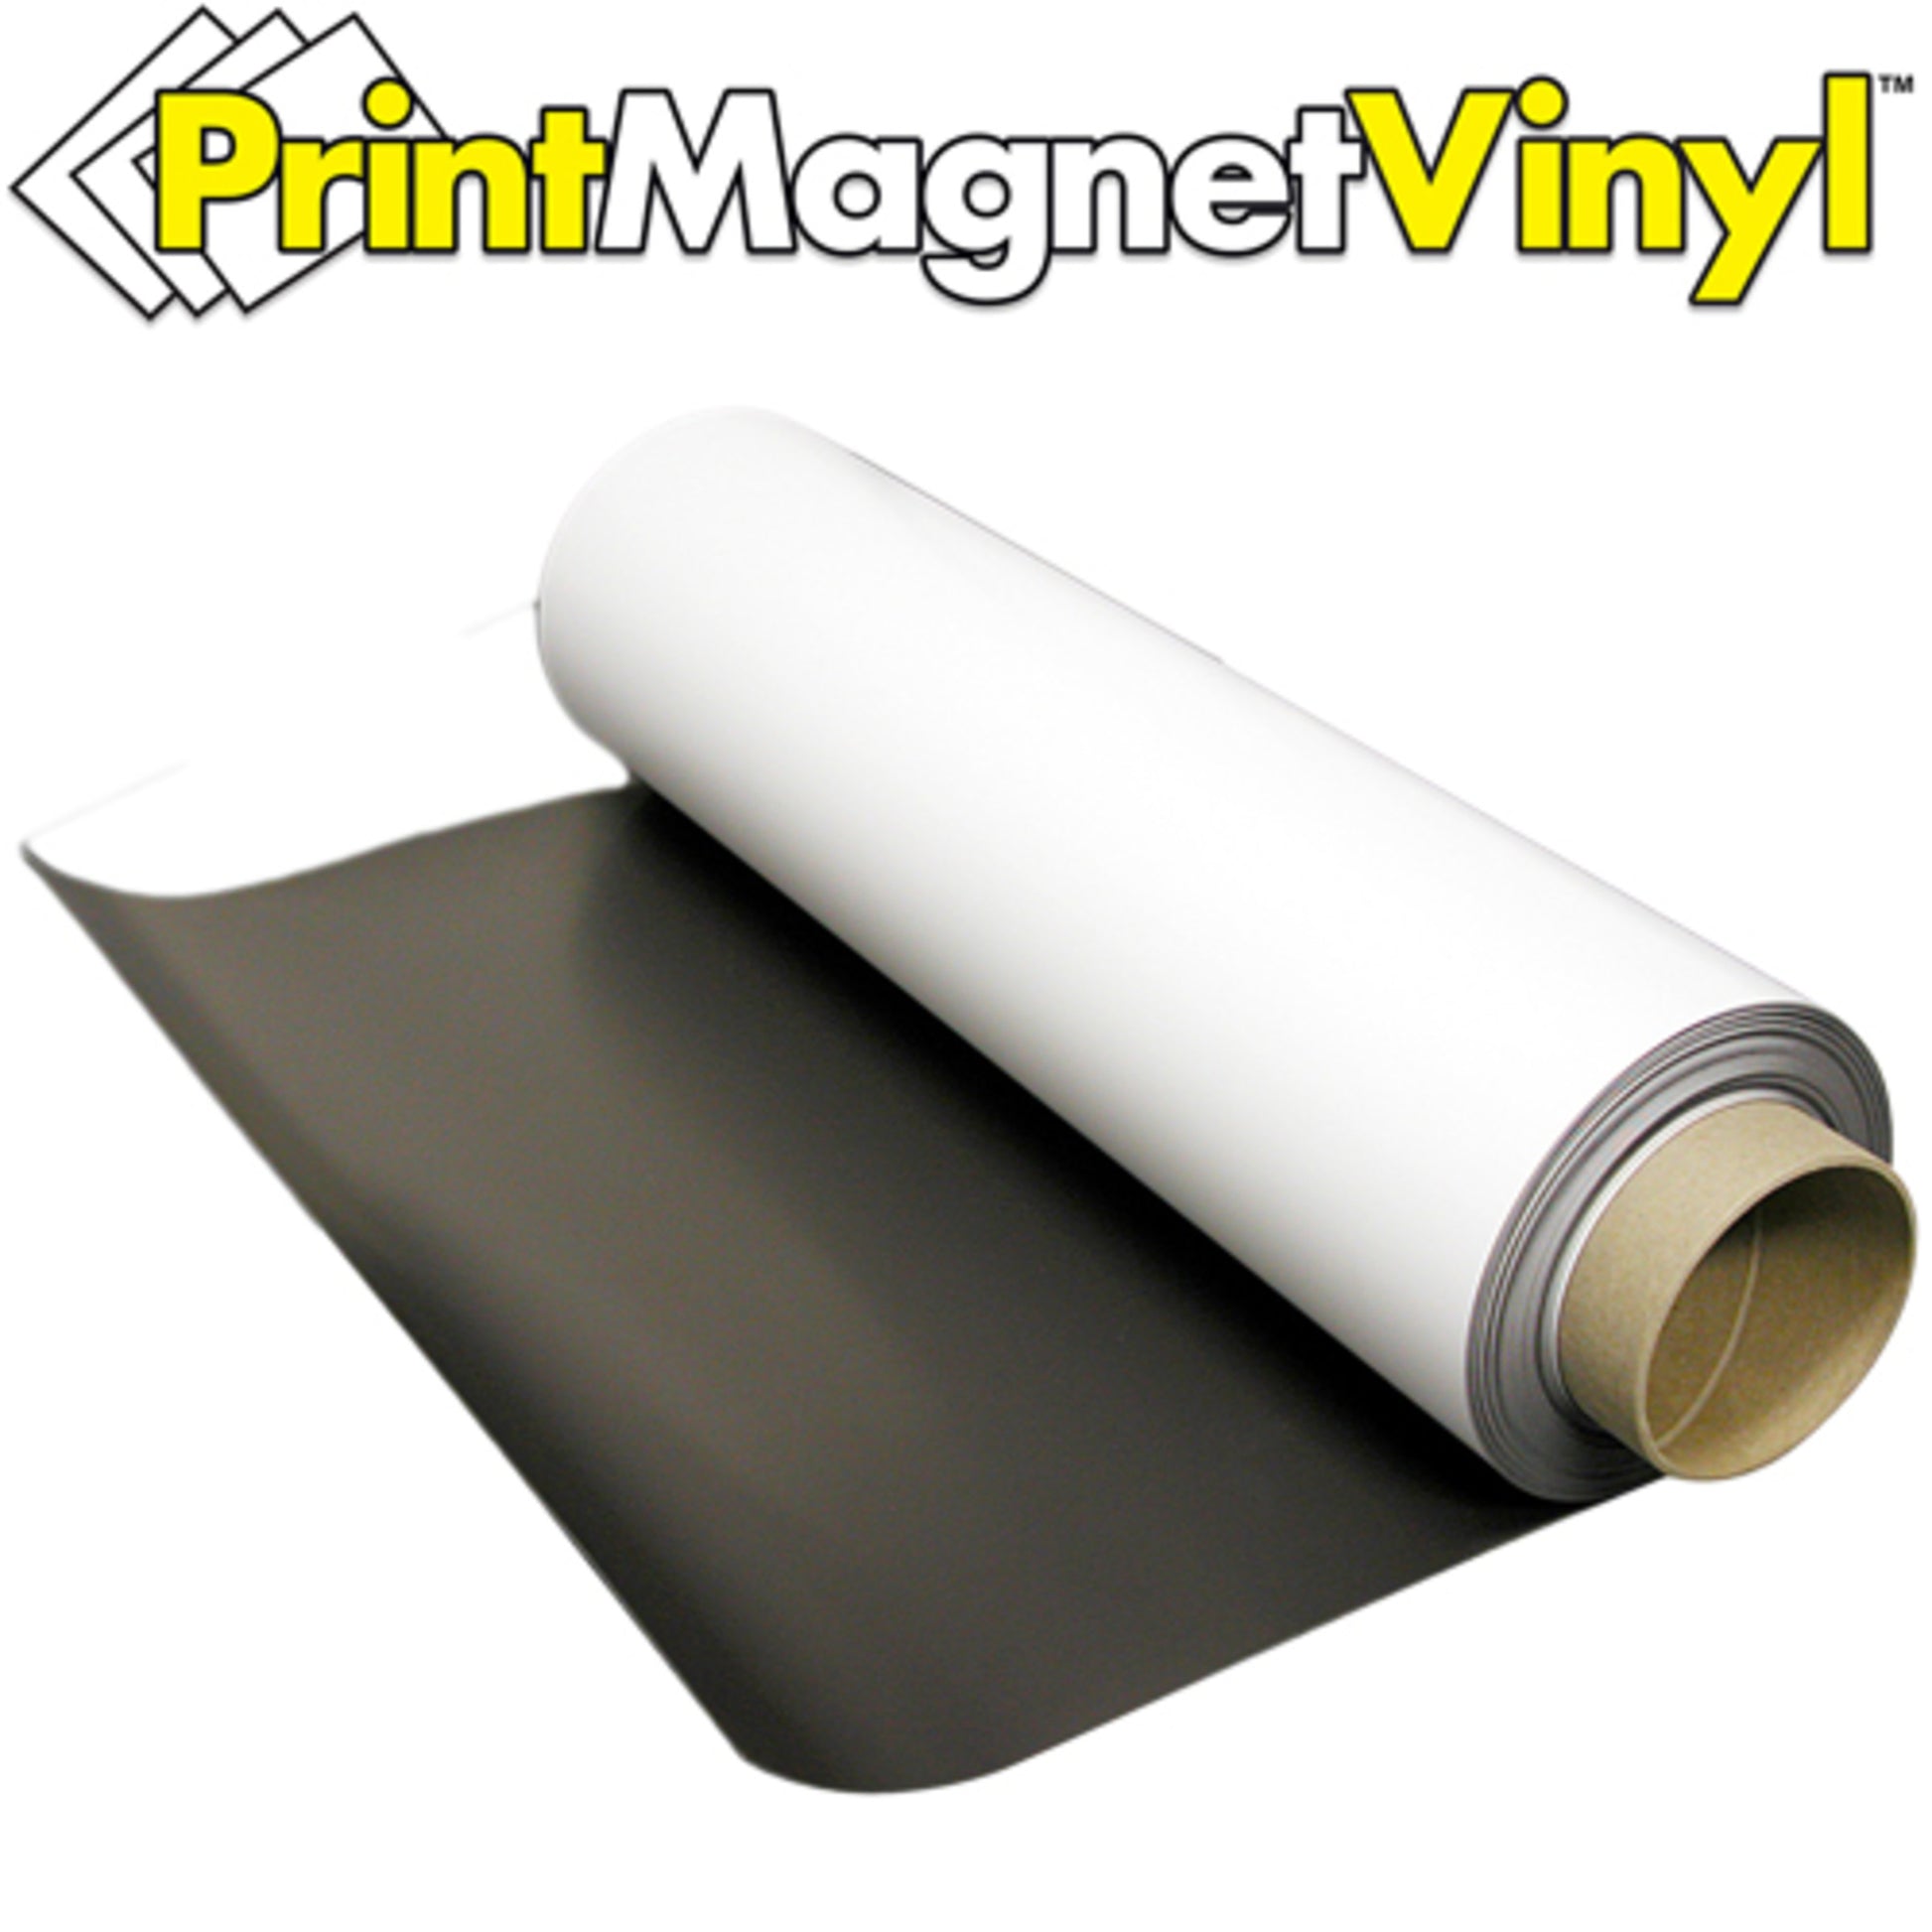 Load image into Gallery viewer, ZG3024GW25F PrintMagnetVinyl™ Flexible Magnetic Sheet - In Use